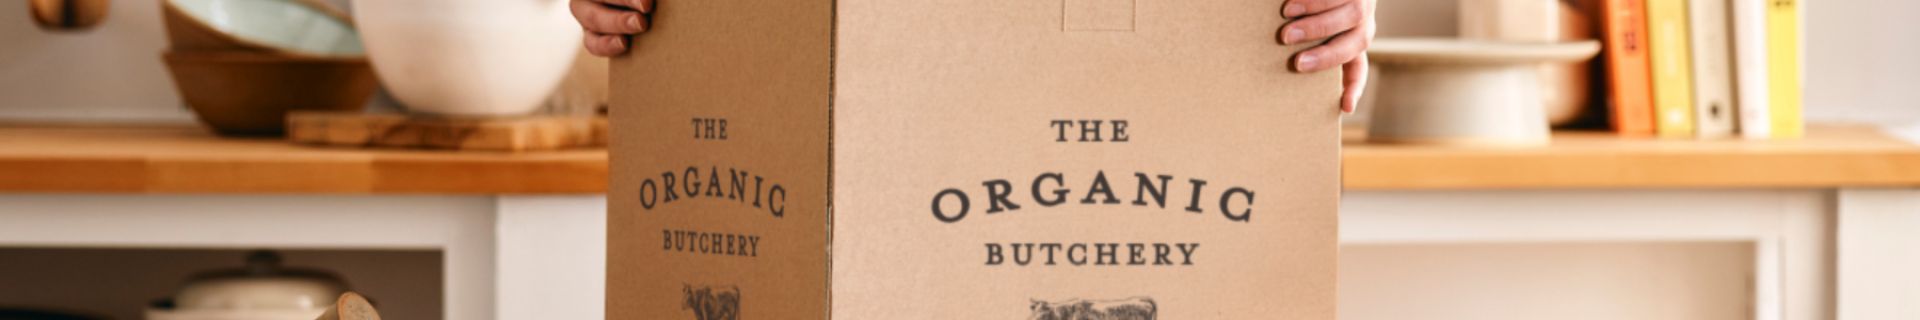 Look Inside Our New Organic Meat Boxes